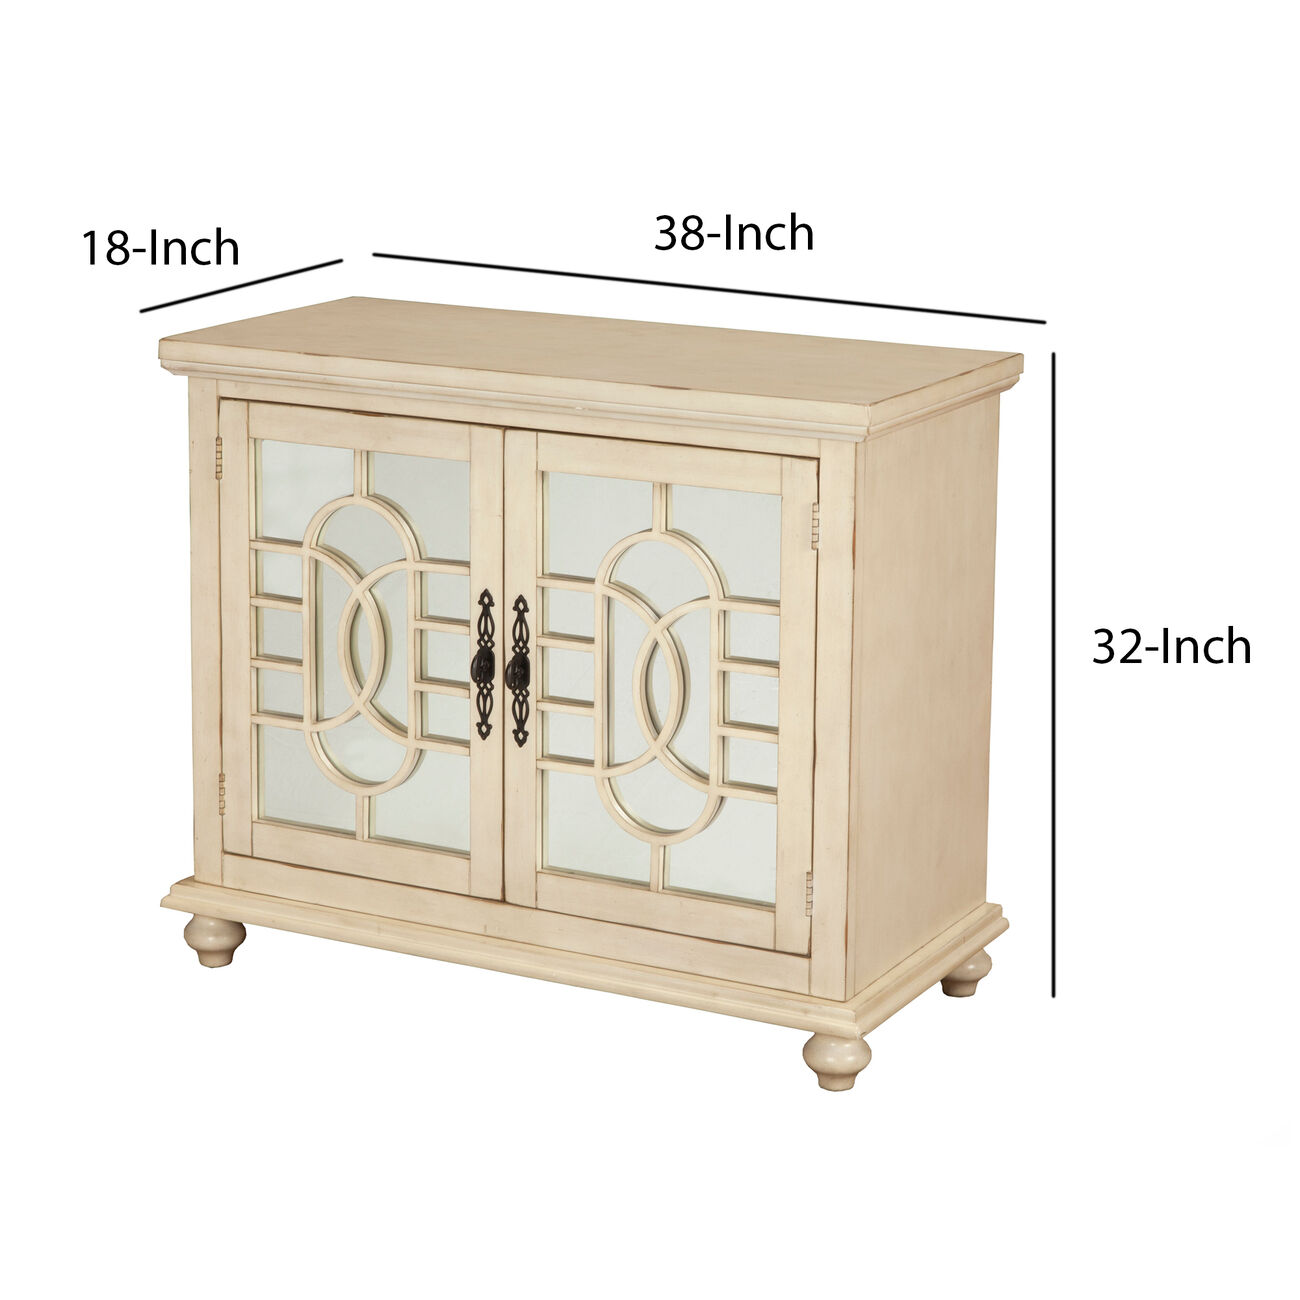 Transitional Wood and Glass TV Stand with Trellis Cabinet Front, Beige